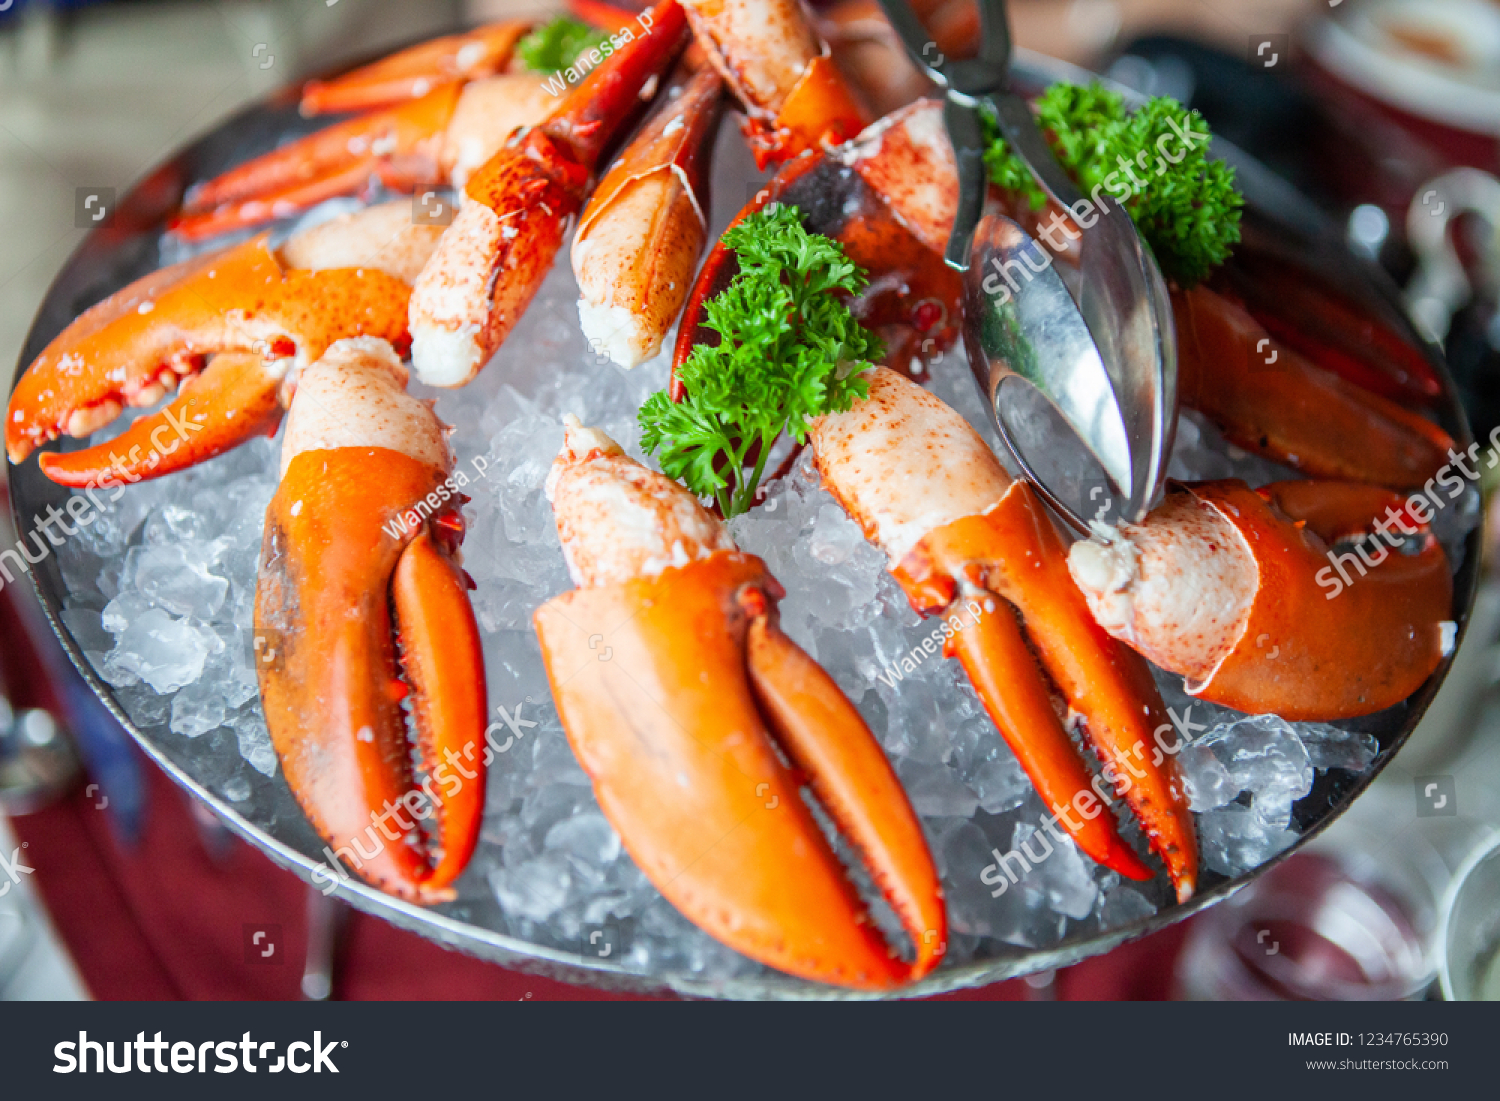 Simple yet delicious. Claws of fresh and tasty bright red poached Maine Lobster or American lobster seafood on ice. Contain cholesterol, but low in saturated fat and also have omega-3 fatty acid. #1234765390